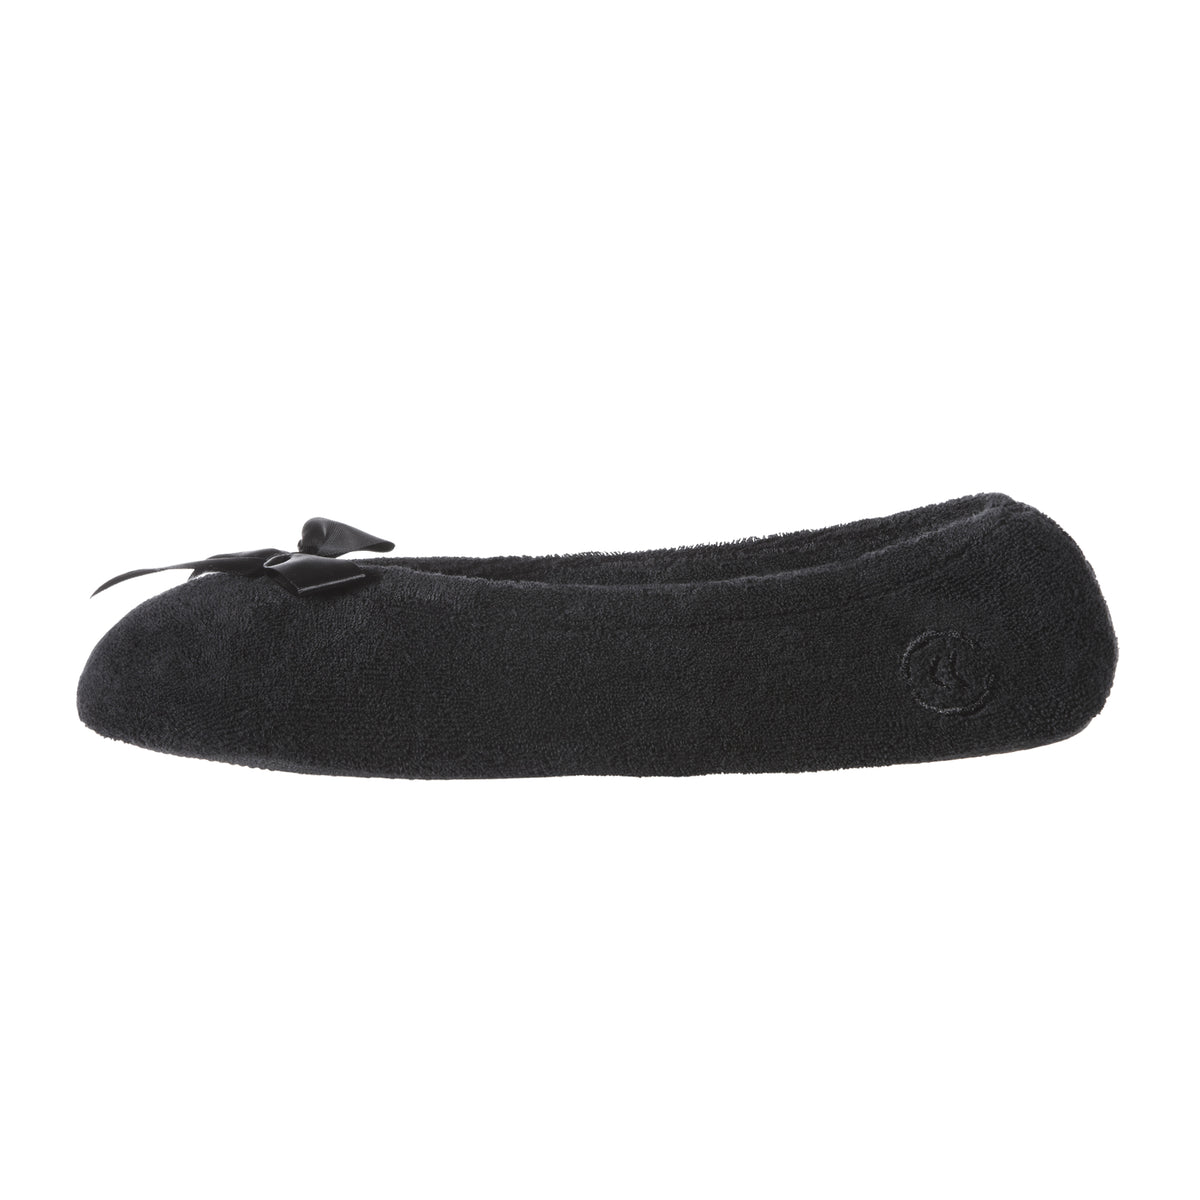 Isotoner Women’s Stretch Terry Classic Ballerina Slippers